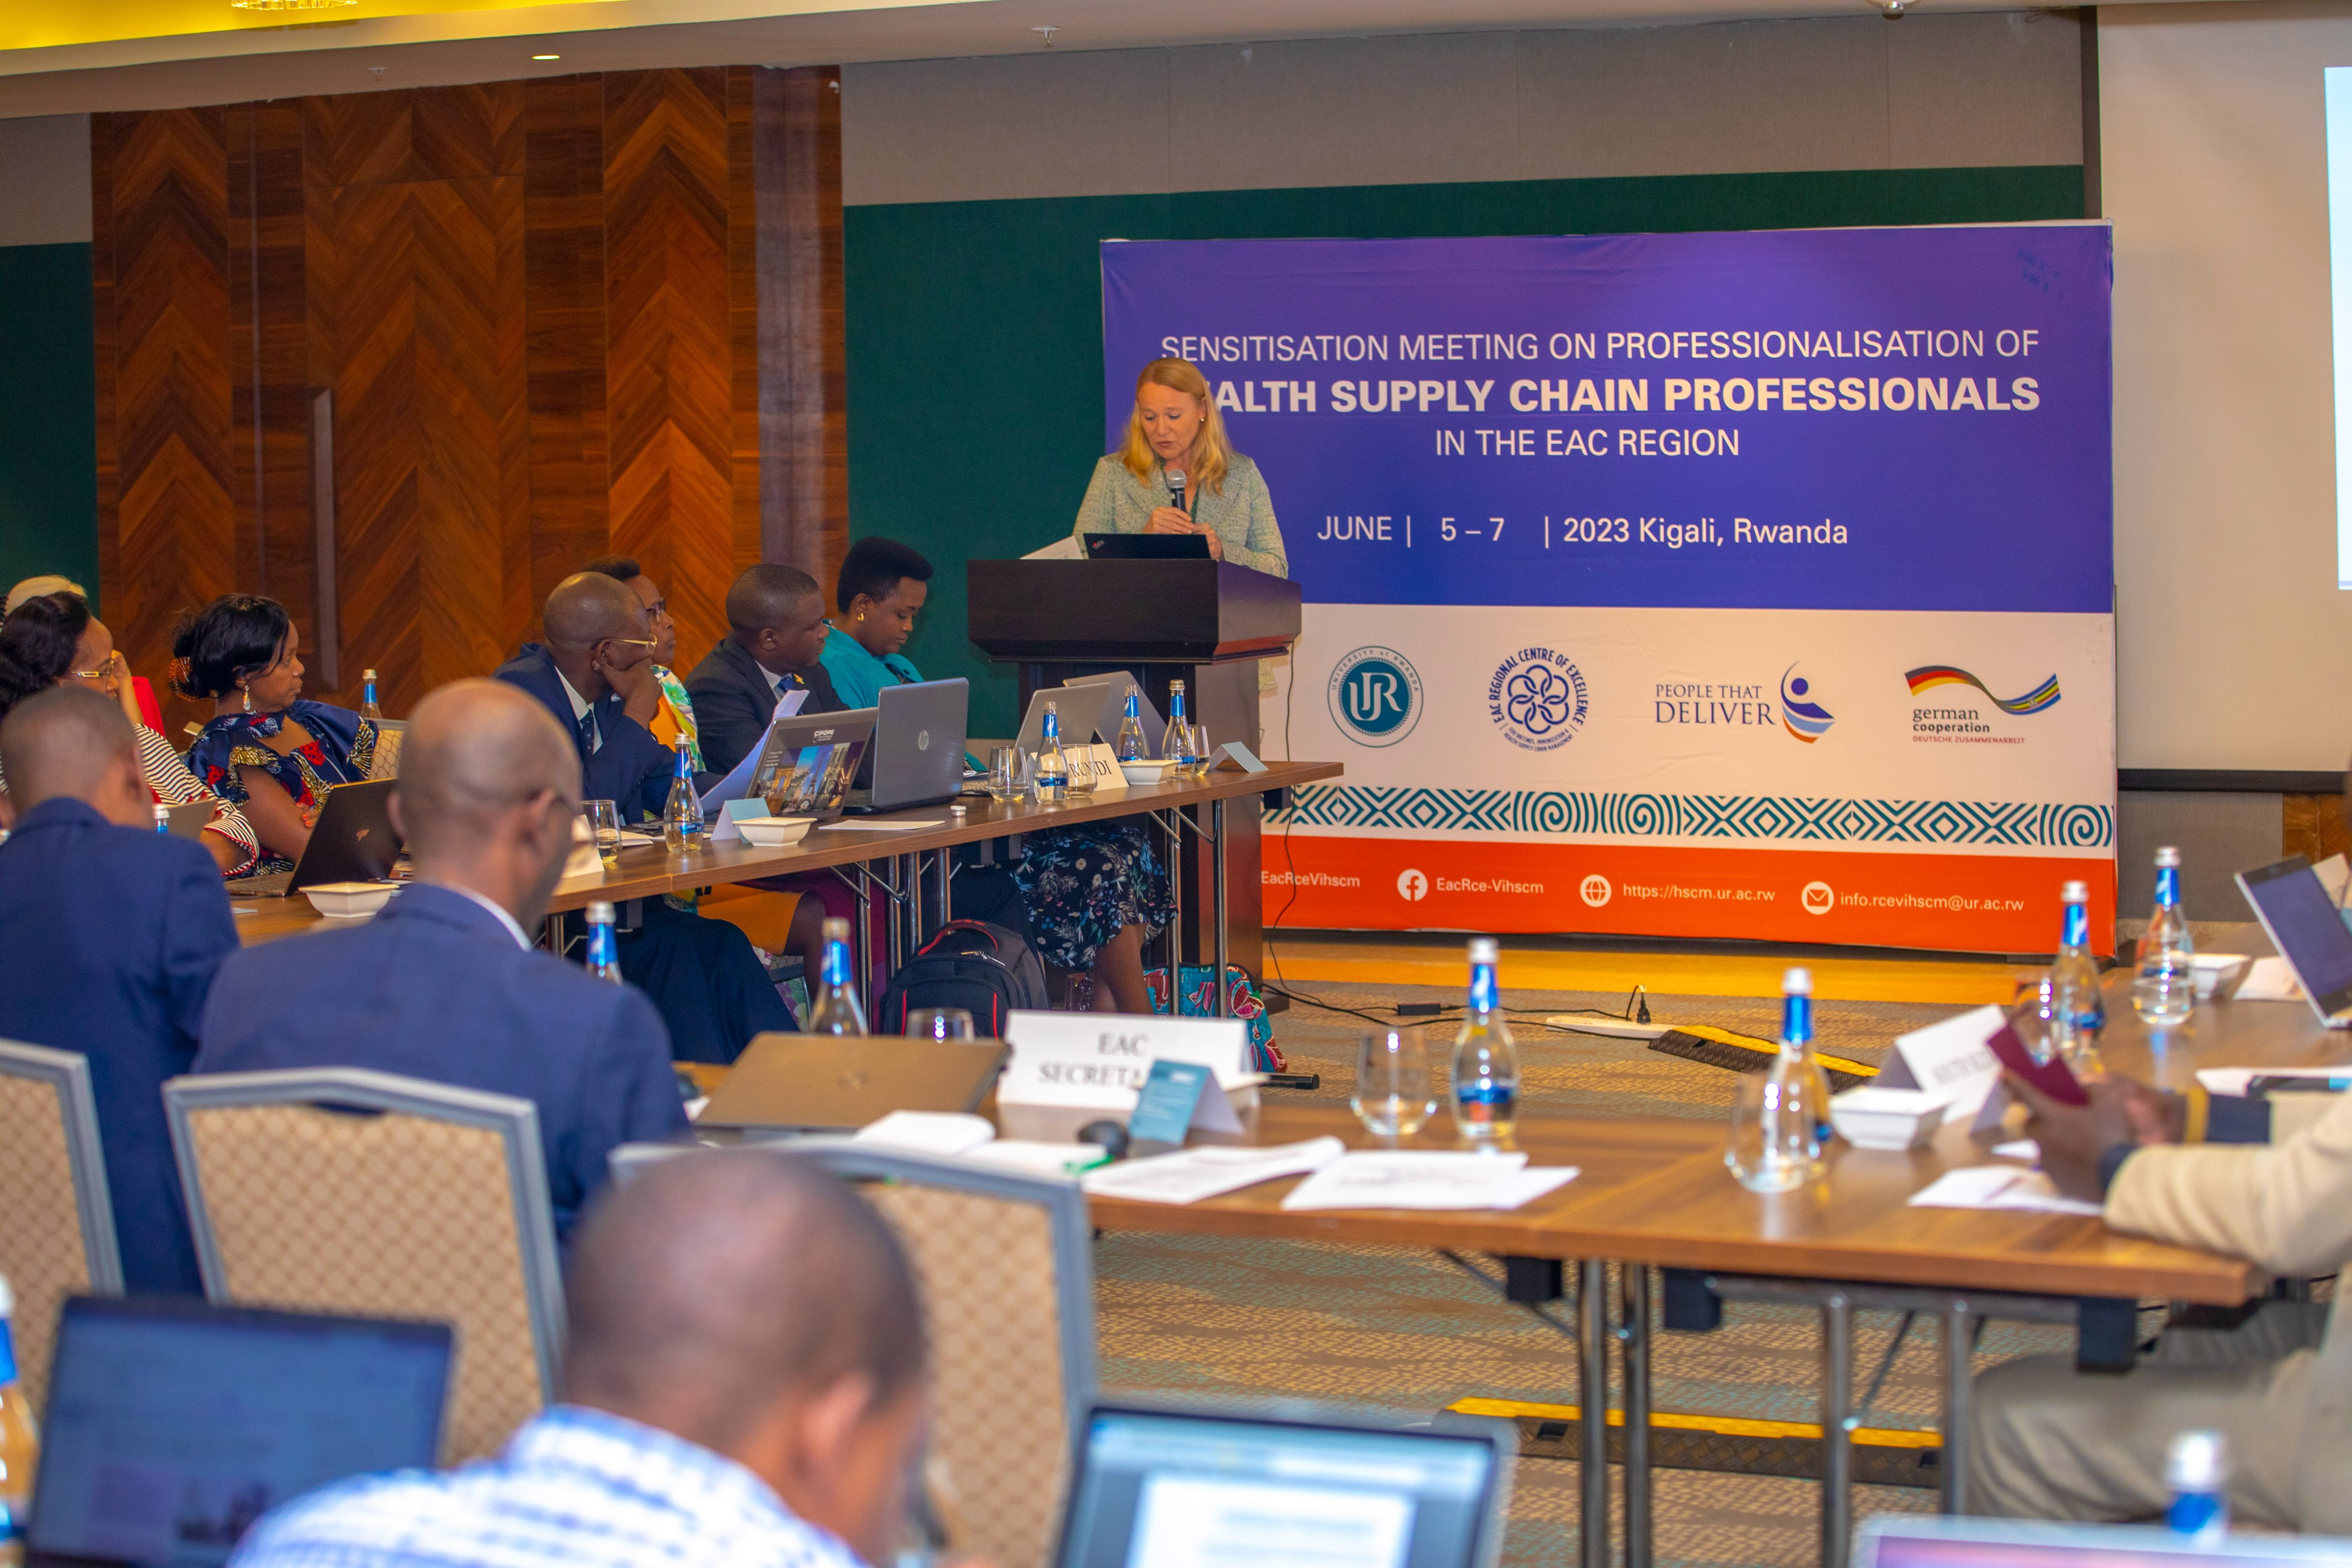 Dominique Zwinkels speaking at the sensitisation meeting on professionalisation of health supply chain professionals in the EAC region